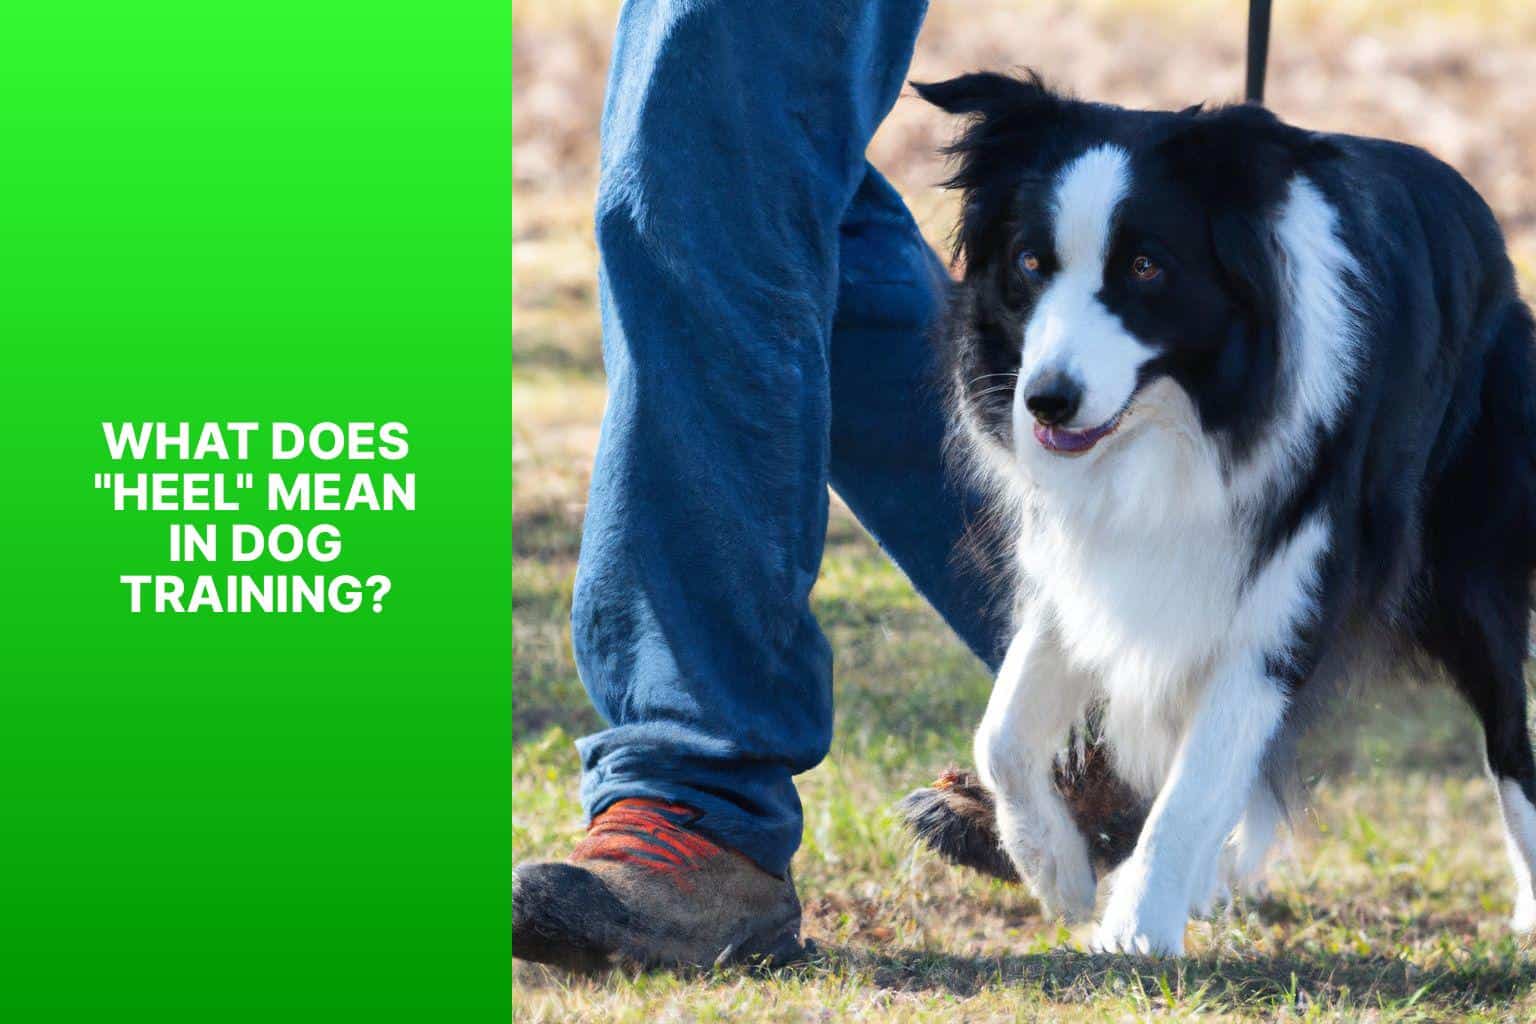 What Does "Heel" Mean in Dog Training? - Why Do Dog Owners Say Heel 